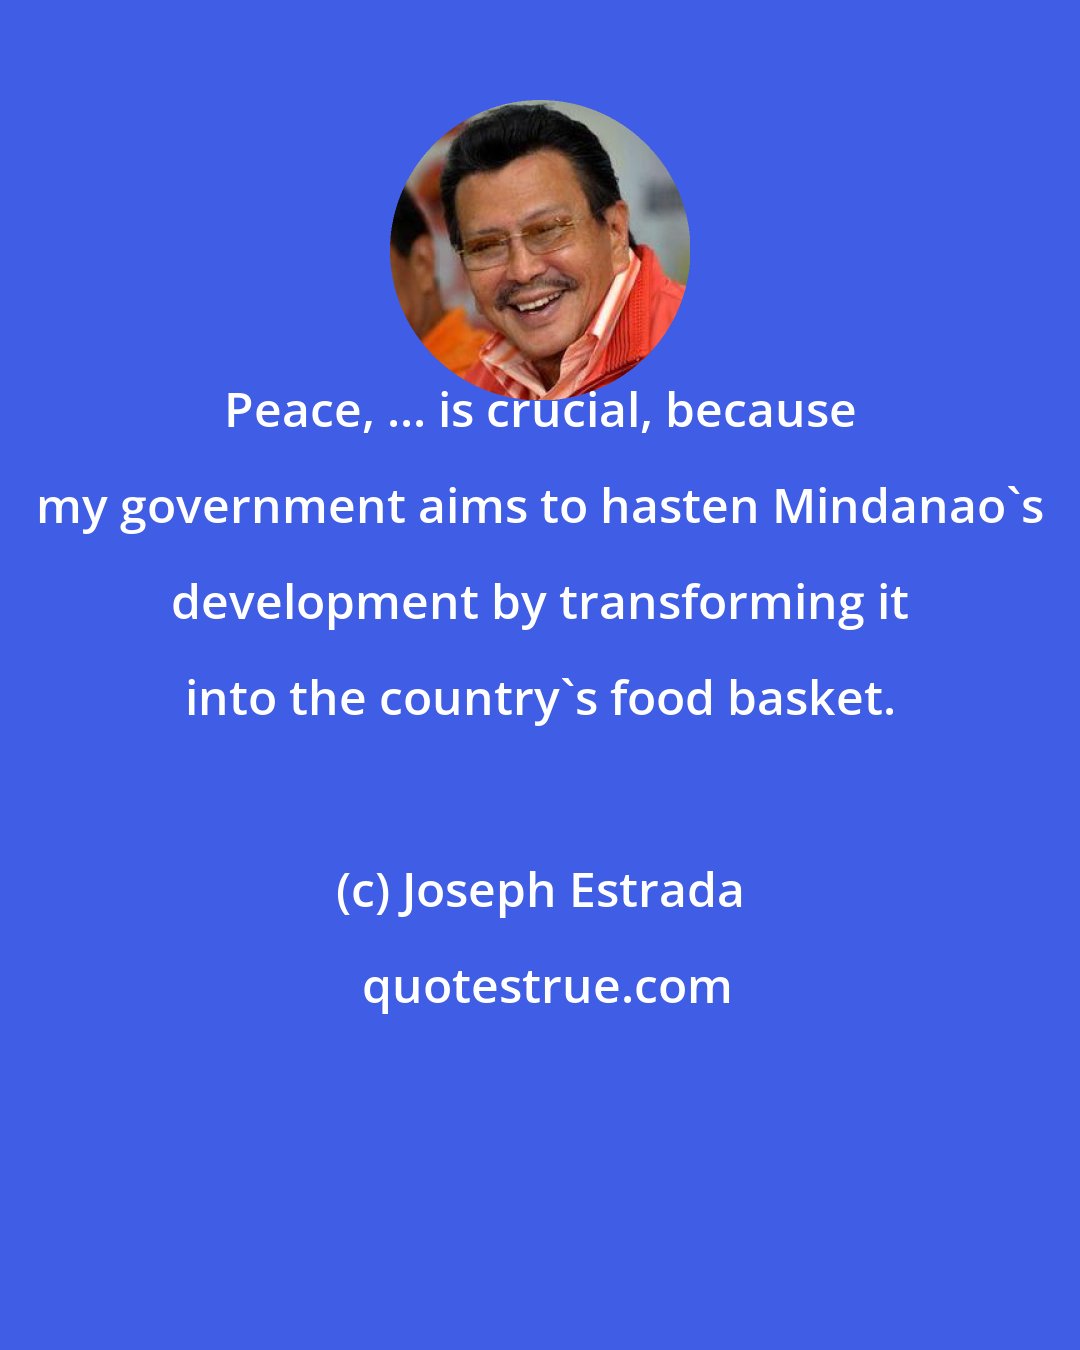 Joseph Estrada: Peace, ... is crucial, because my government aims to hasten Mindanao's development by transforming it into the country's food basket.